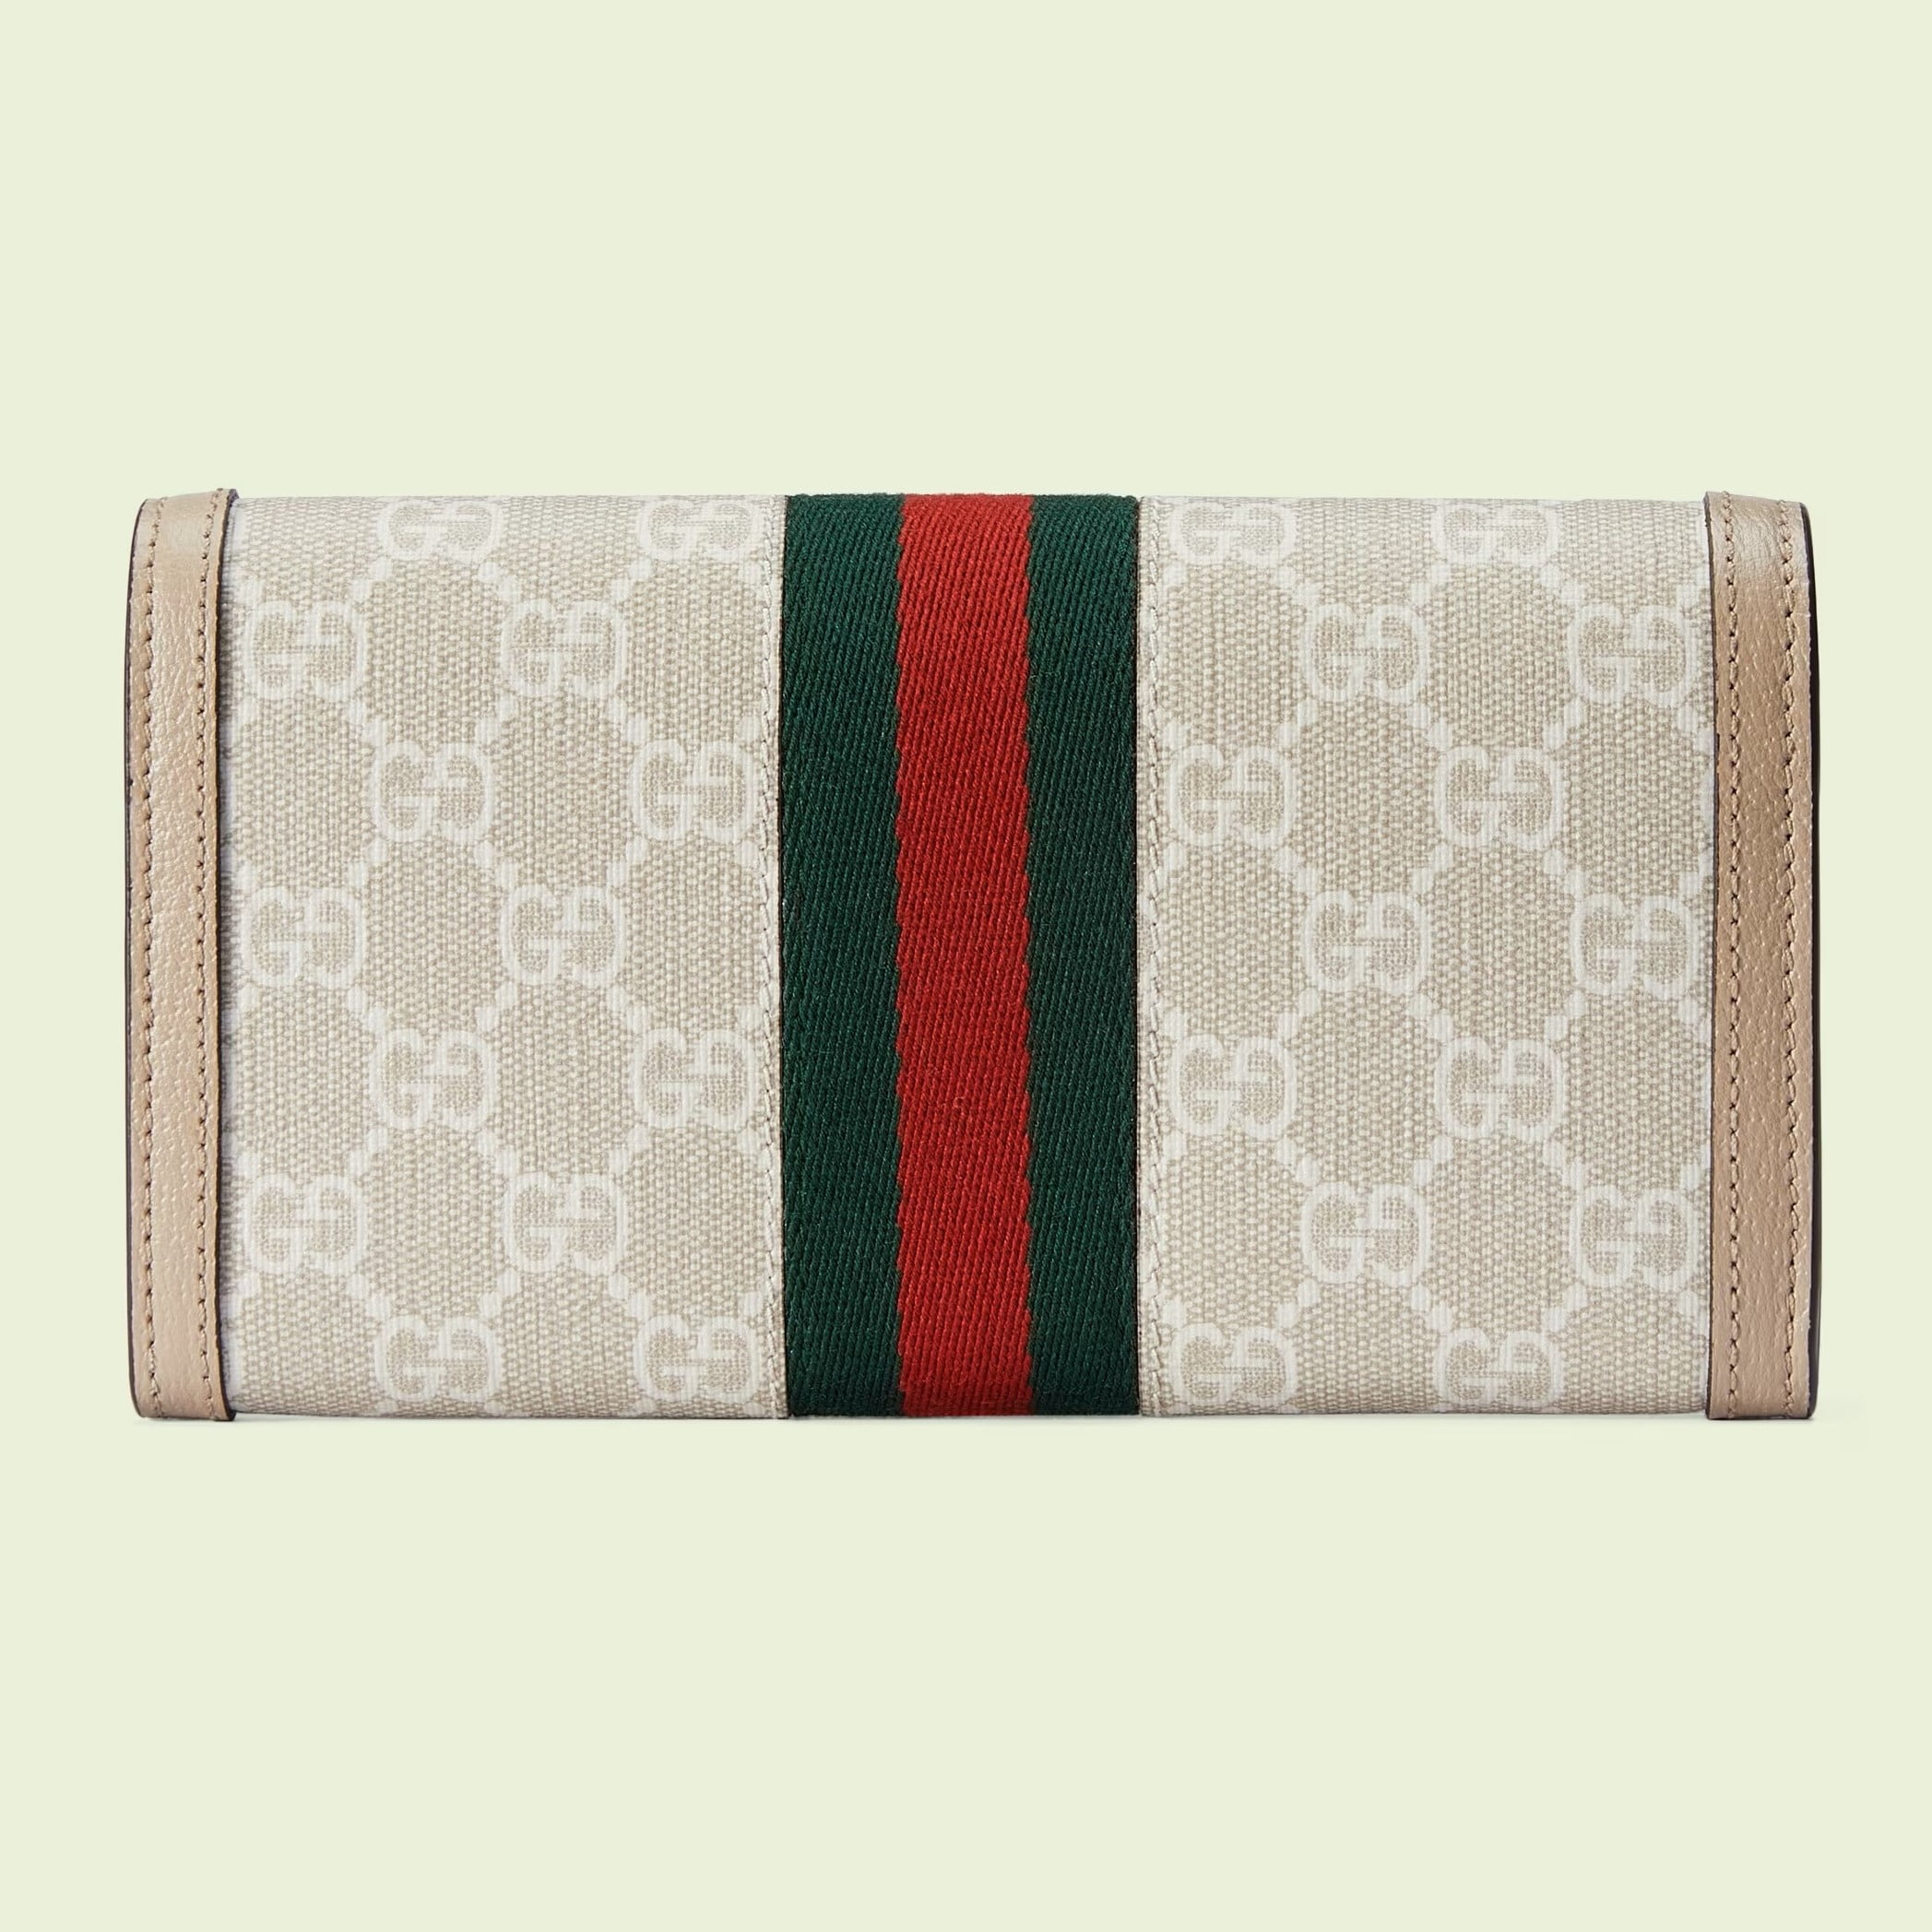 VÍ NỮ DÀI NẤP GẬP GUCCI OPHIDIA GG CONTINENTAL WALLET WITH BEIGE AND WHITE GG SUPREME CANVAS 4